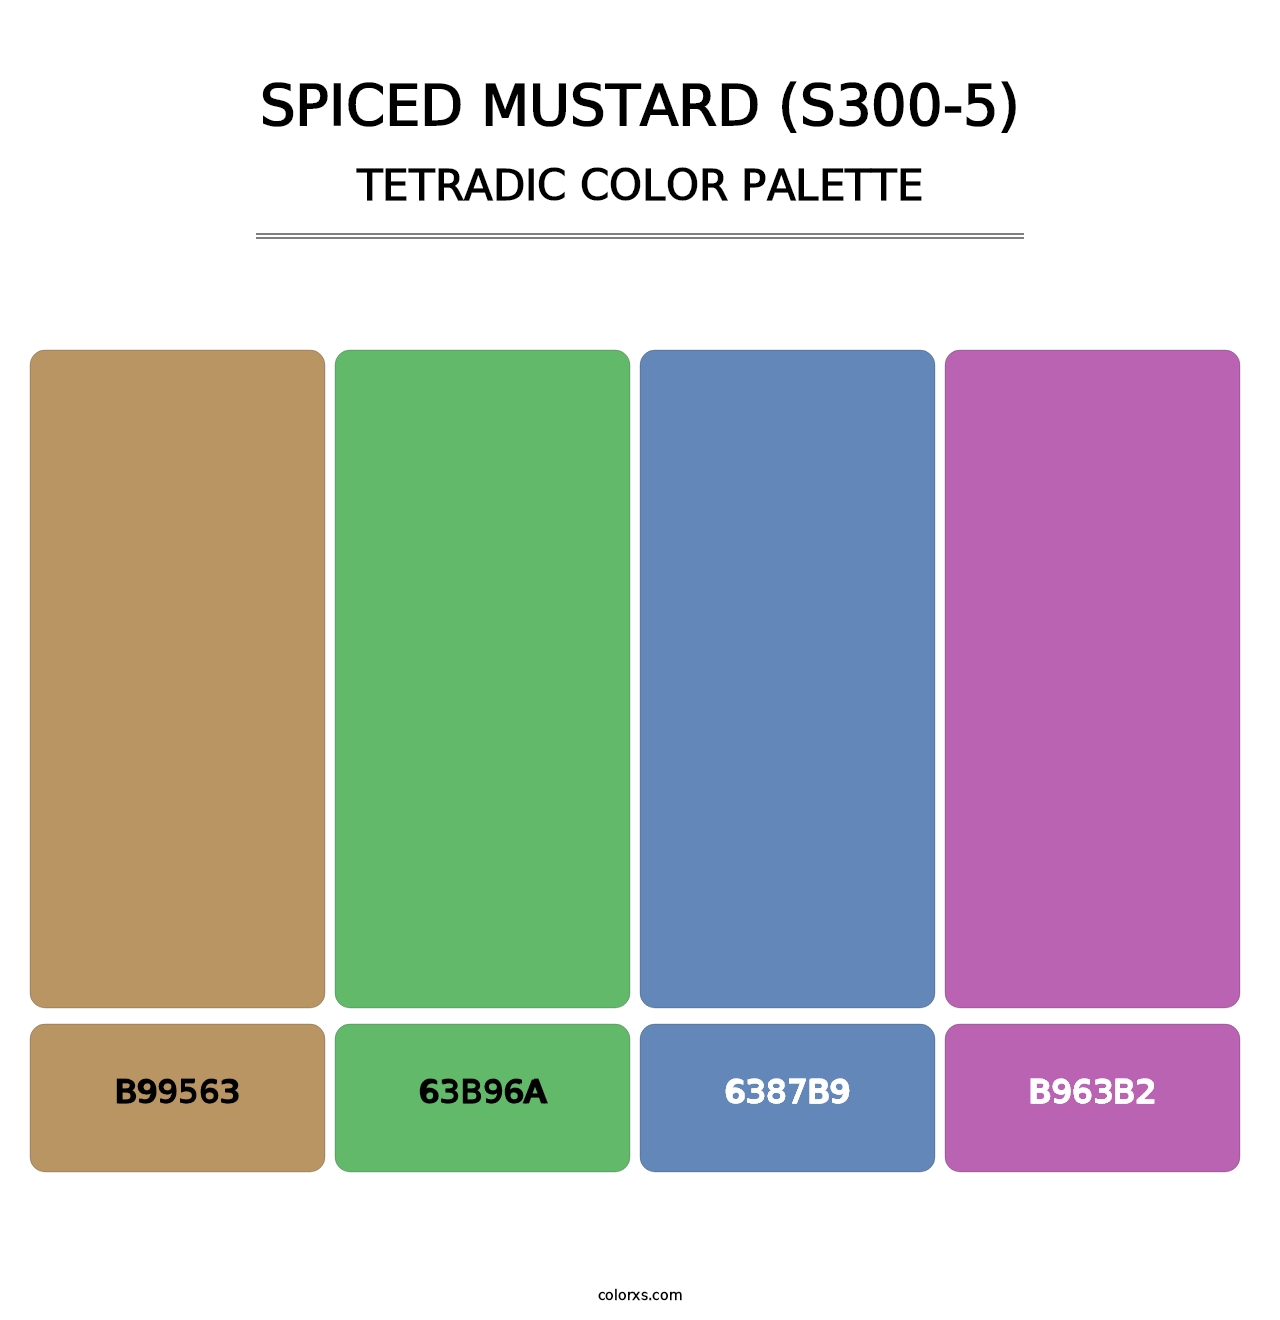 Spiced Mustard (S300-5) - Tetradic Color Palette